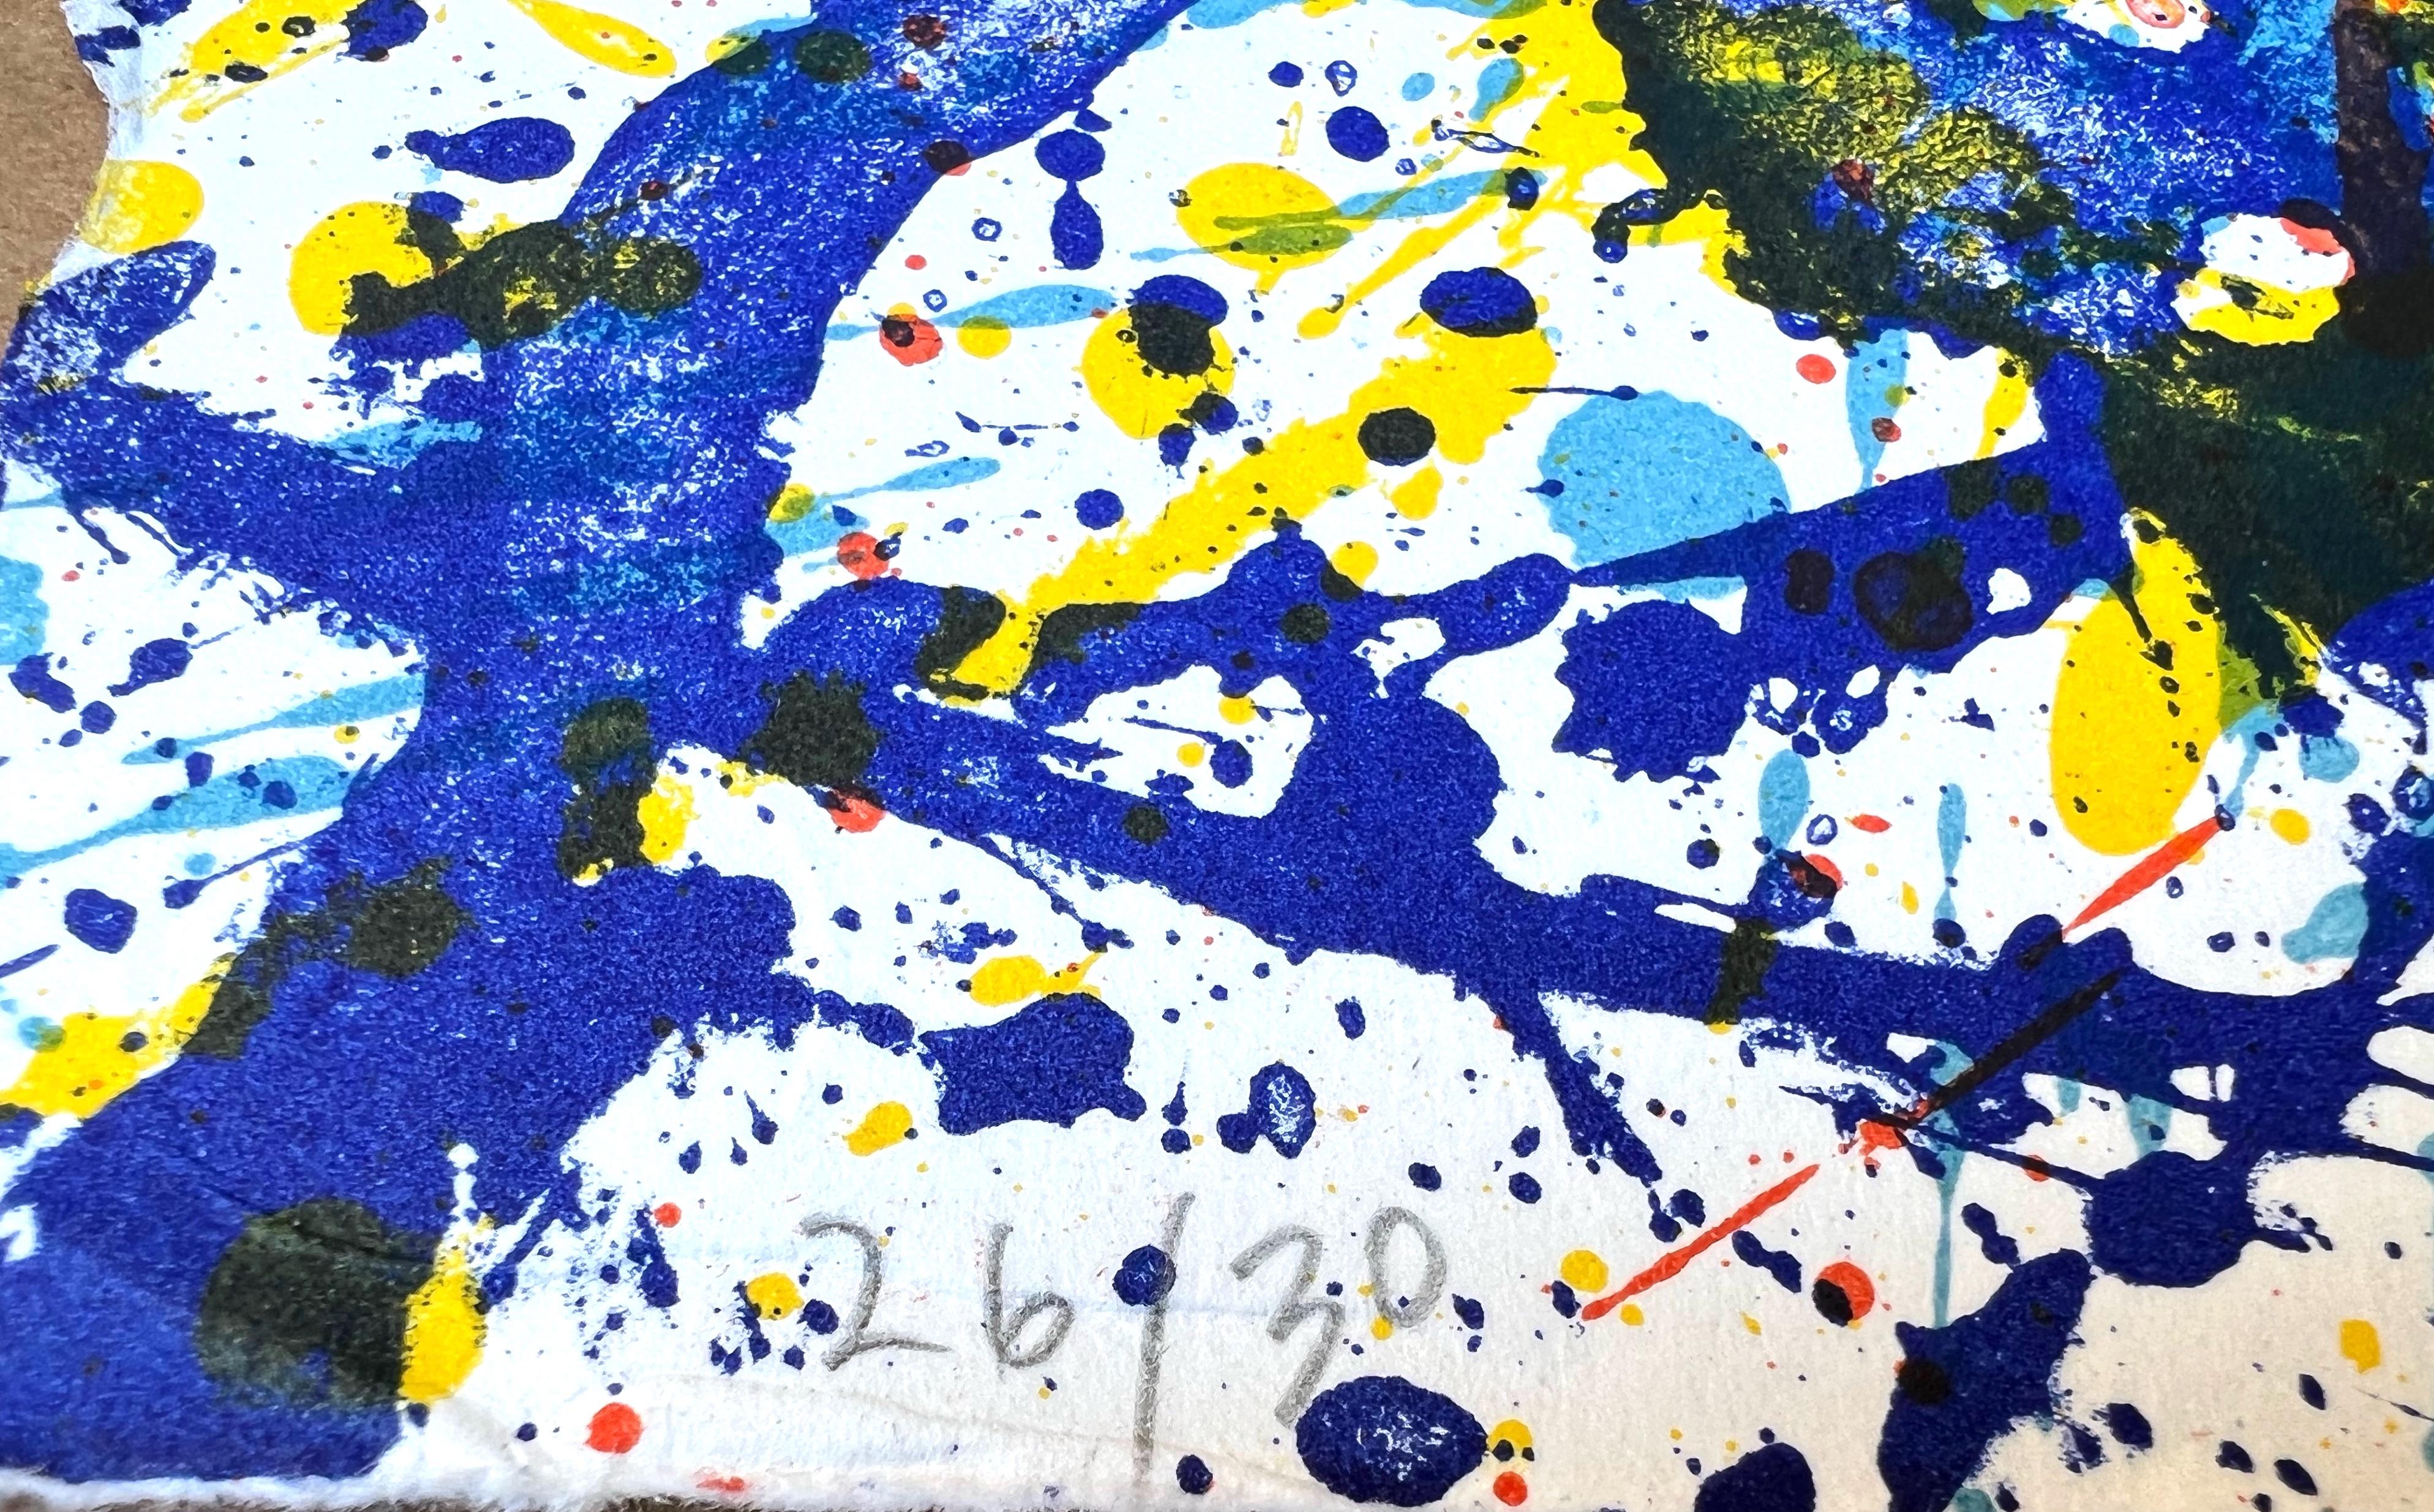 Untitled - Original Lithograph by Sam Francis - 1979 1